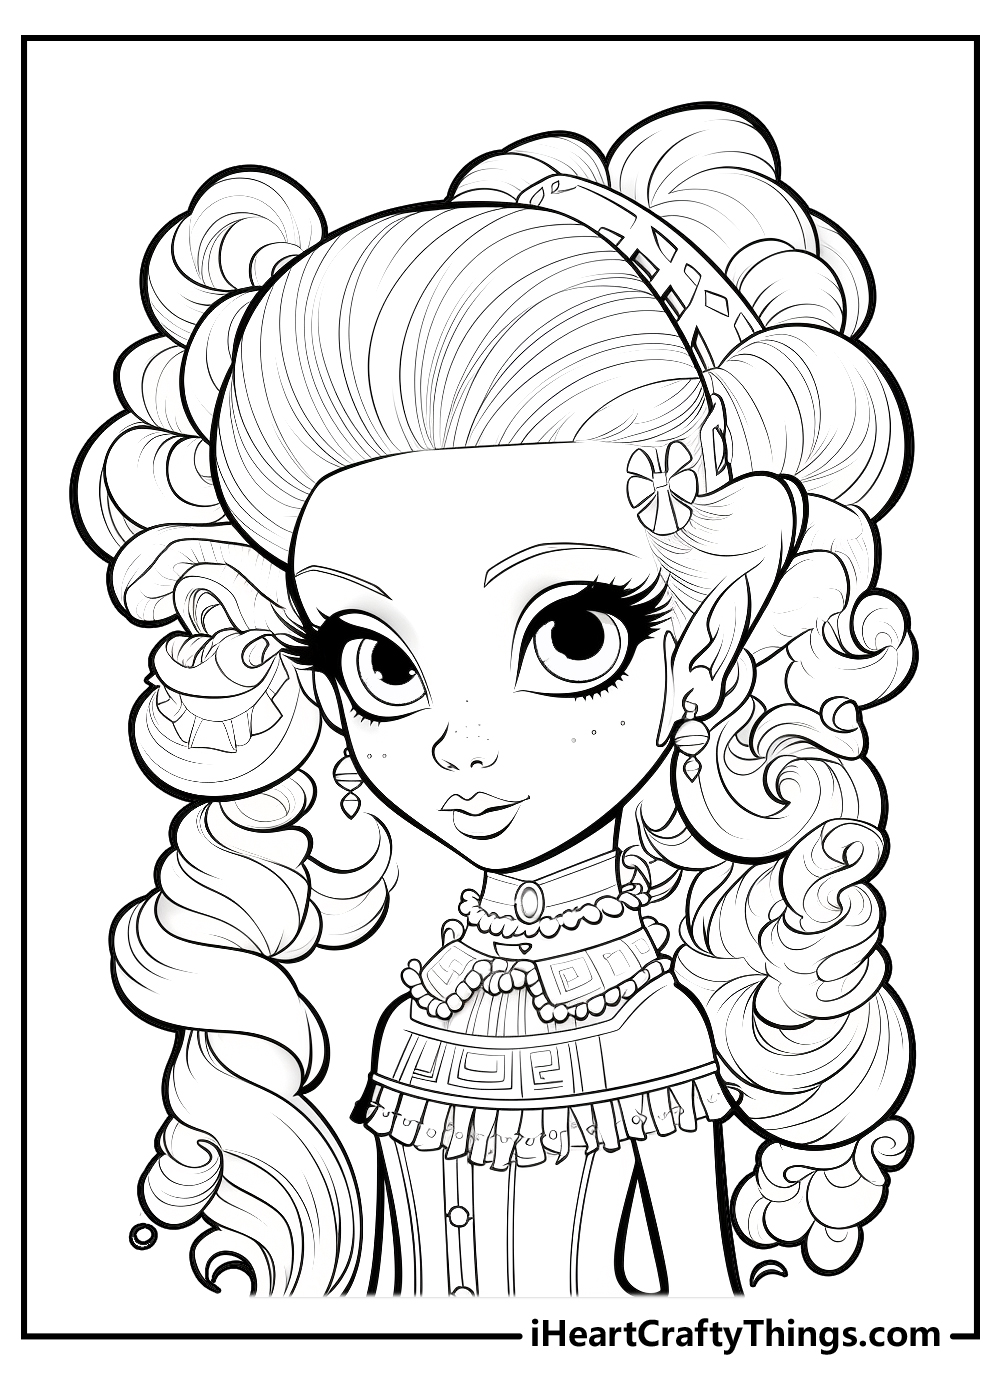 Rainbow High Coloring Pages - Coloring Pages For Kids And Adults in 2023